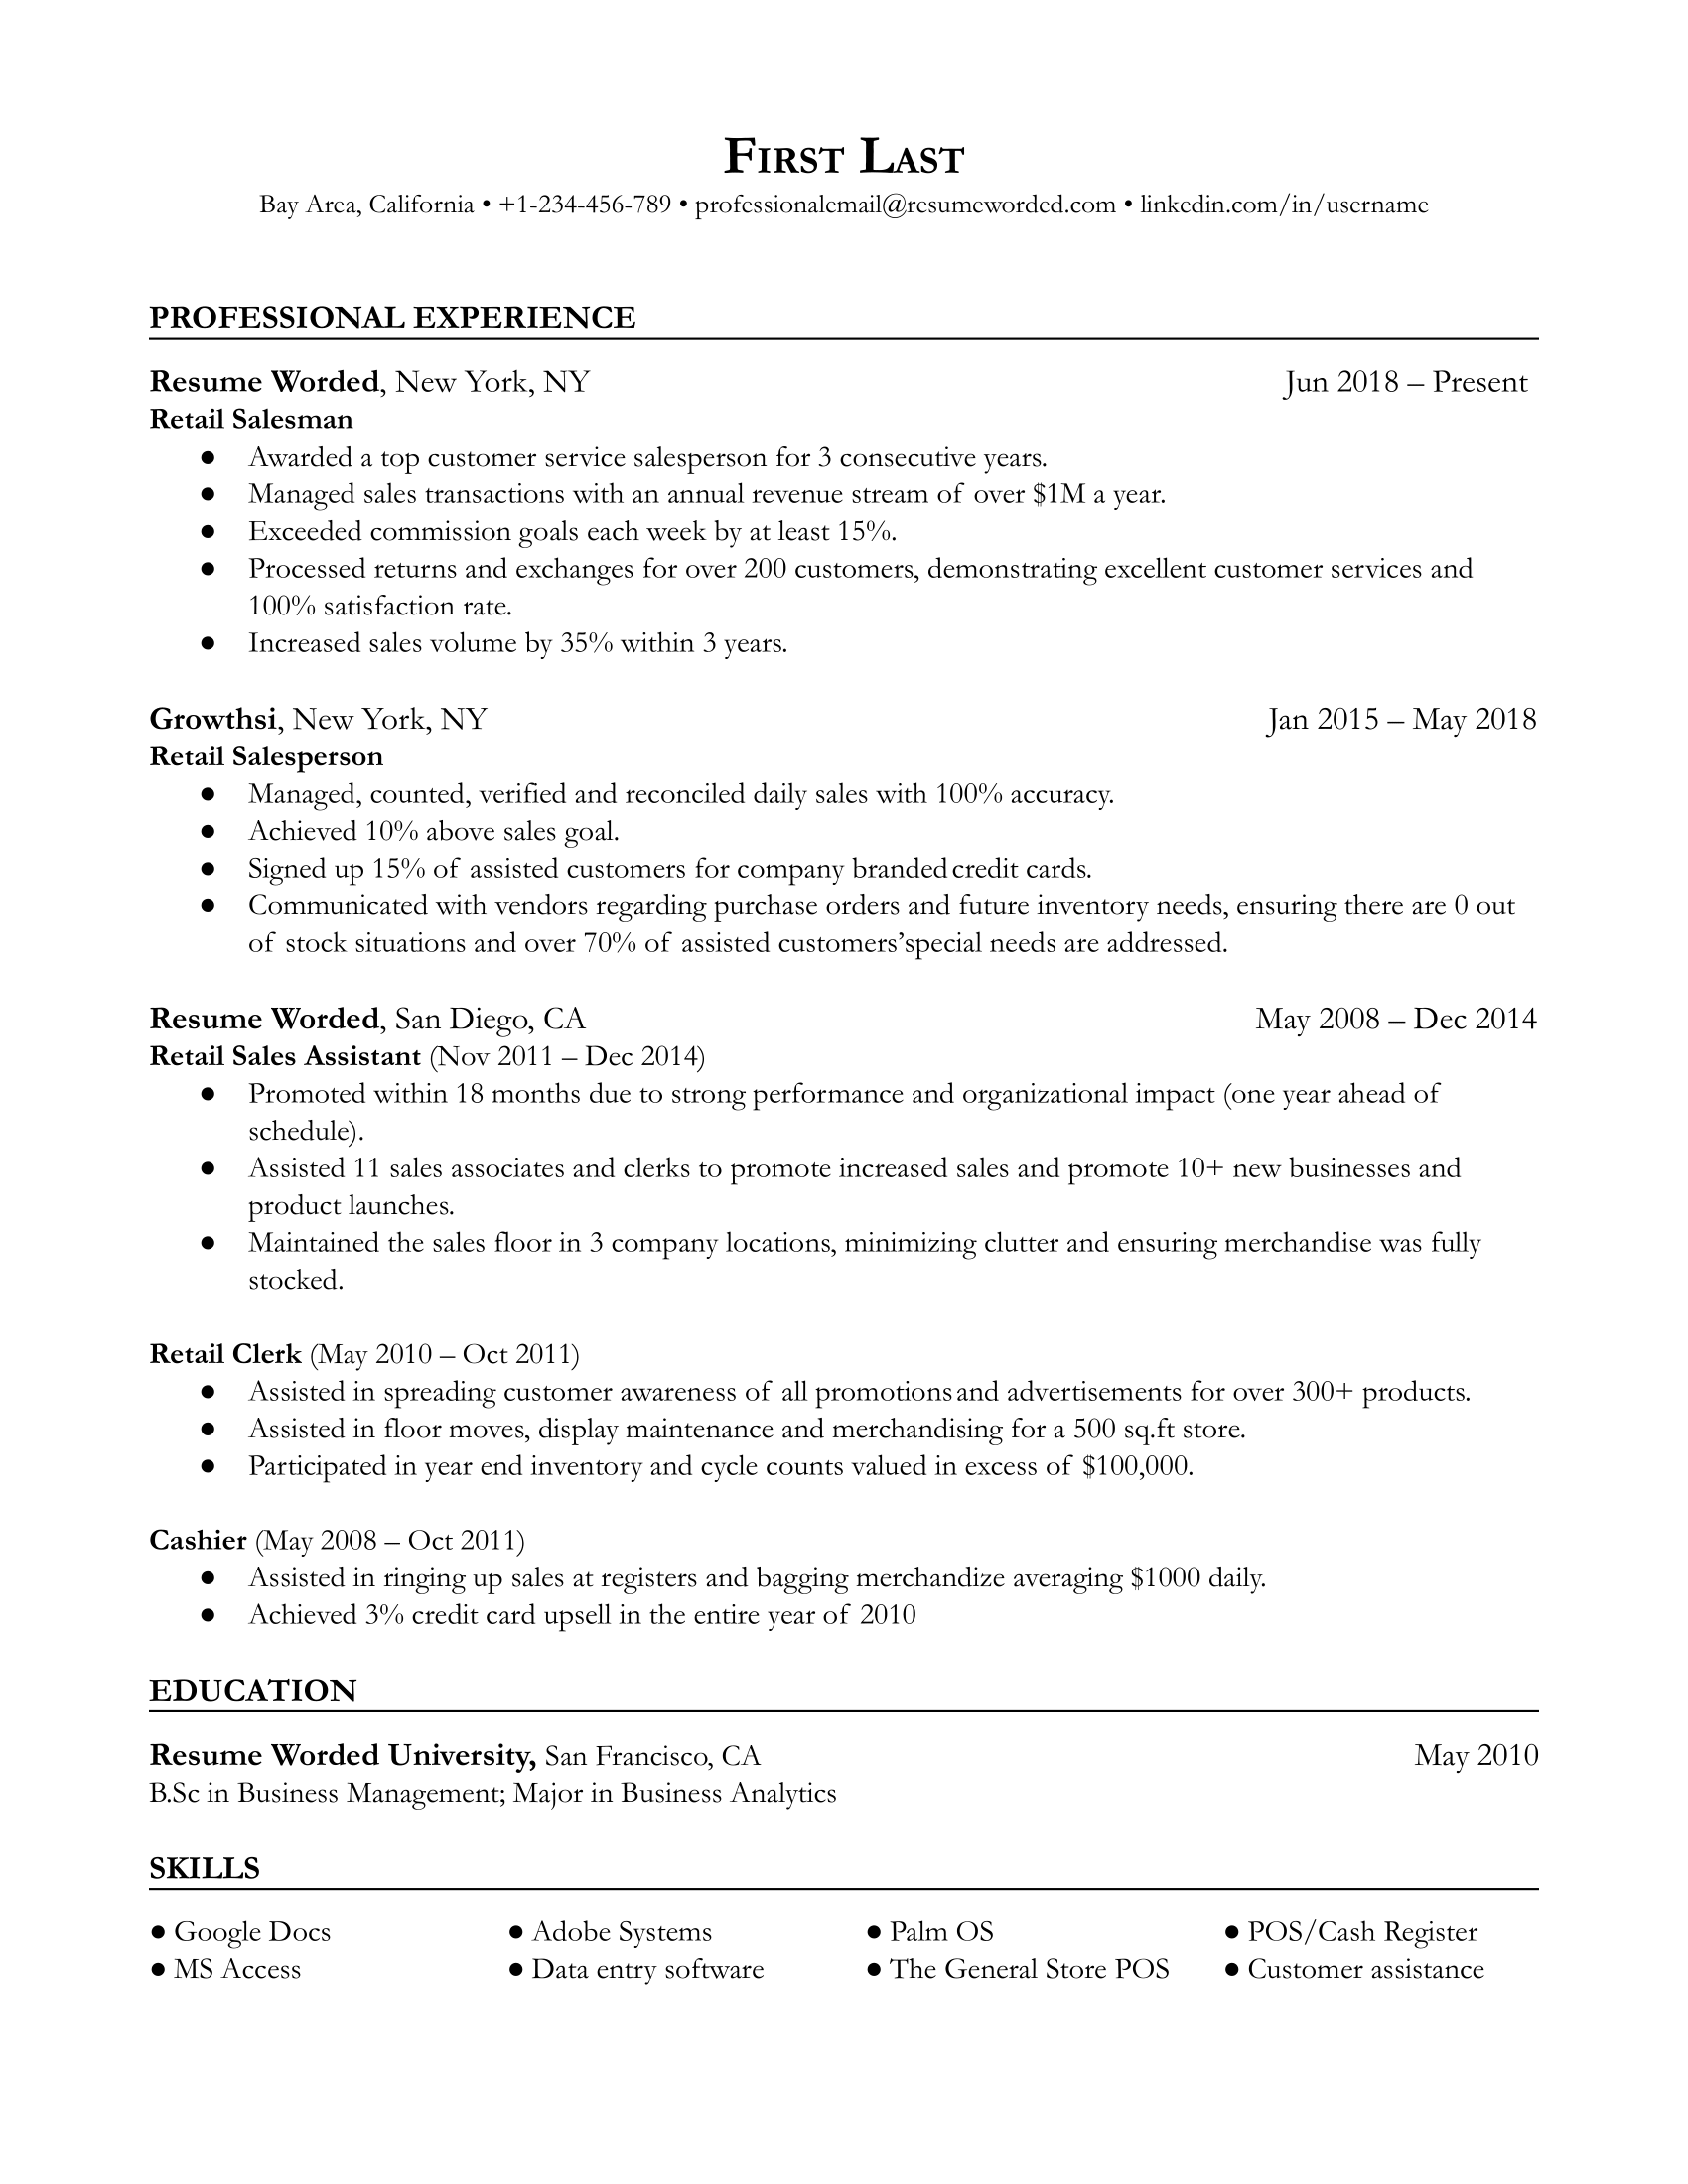 Retail salesperson resume example template showcasing relevant skills and metrics